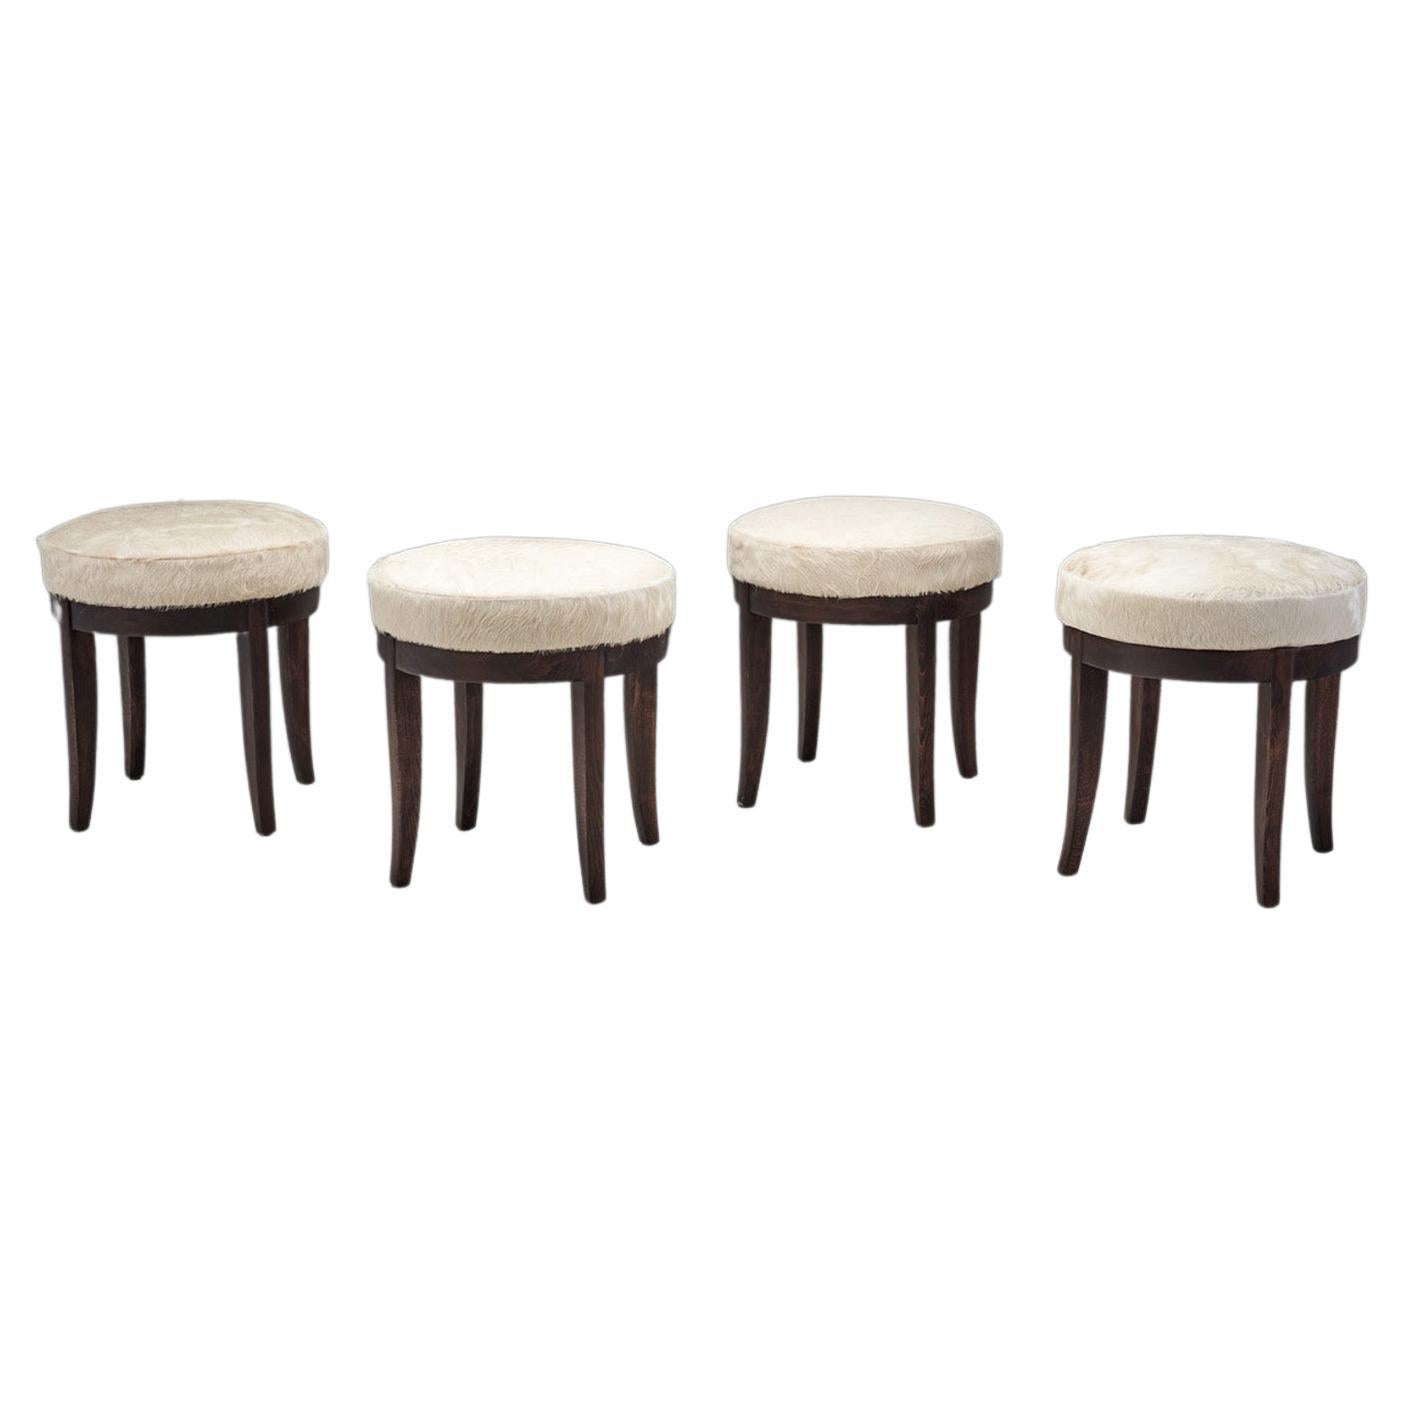 Mid-Century Modern Set of Four Stools in Cowhide, Europe, ca 1950s For Sale